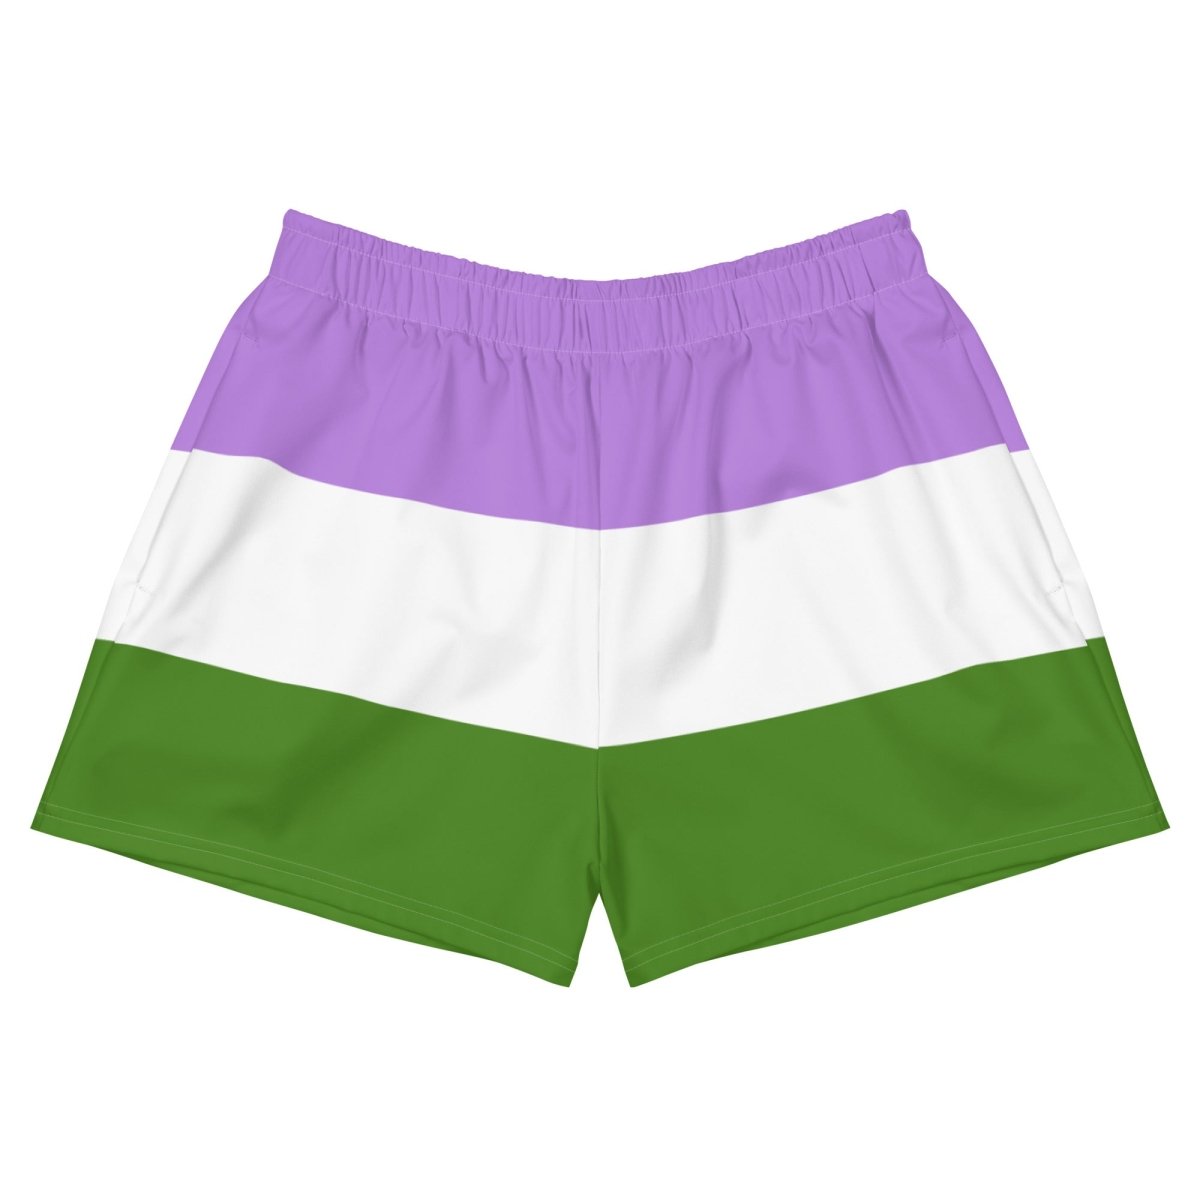 Genderqueer Flag Athletic Shorts - On Trend Shirts